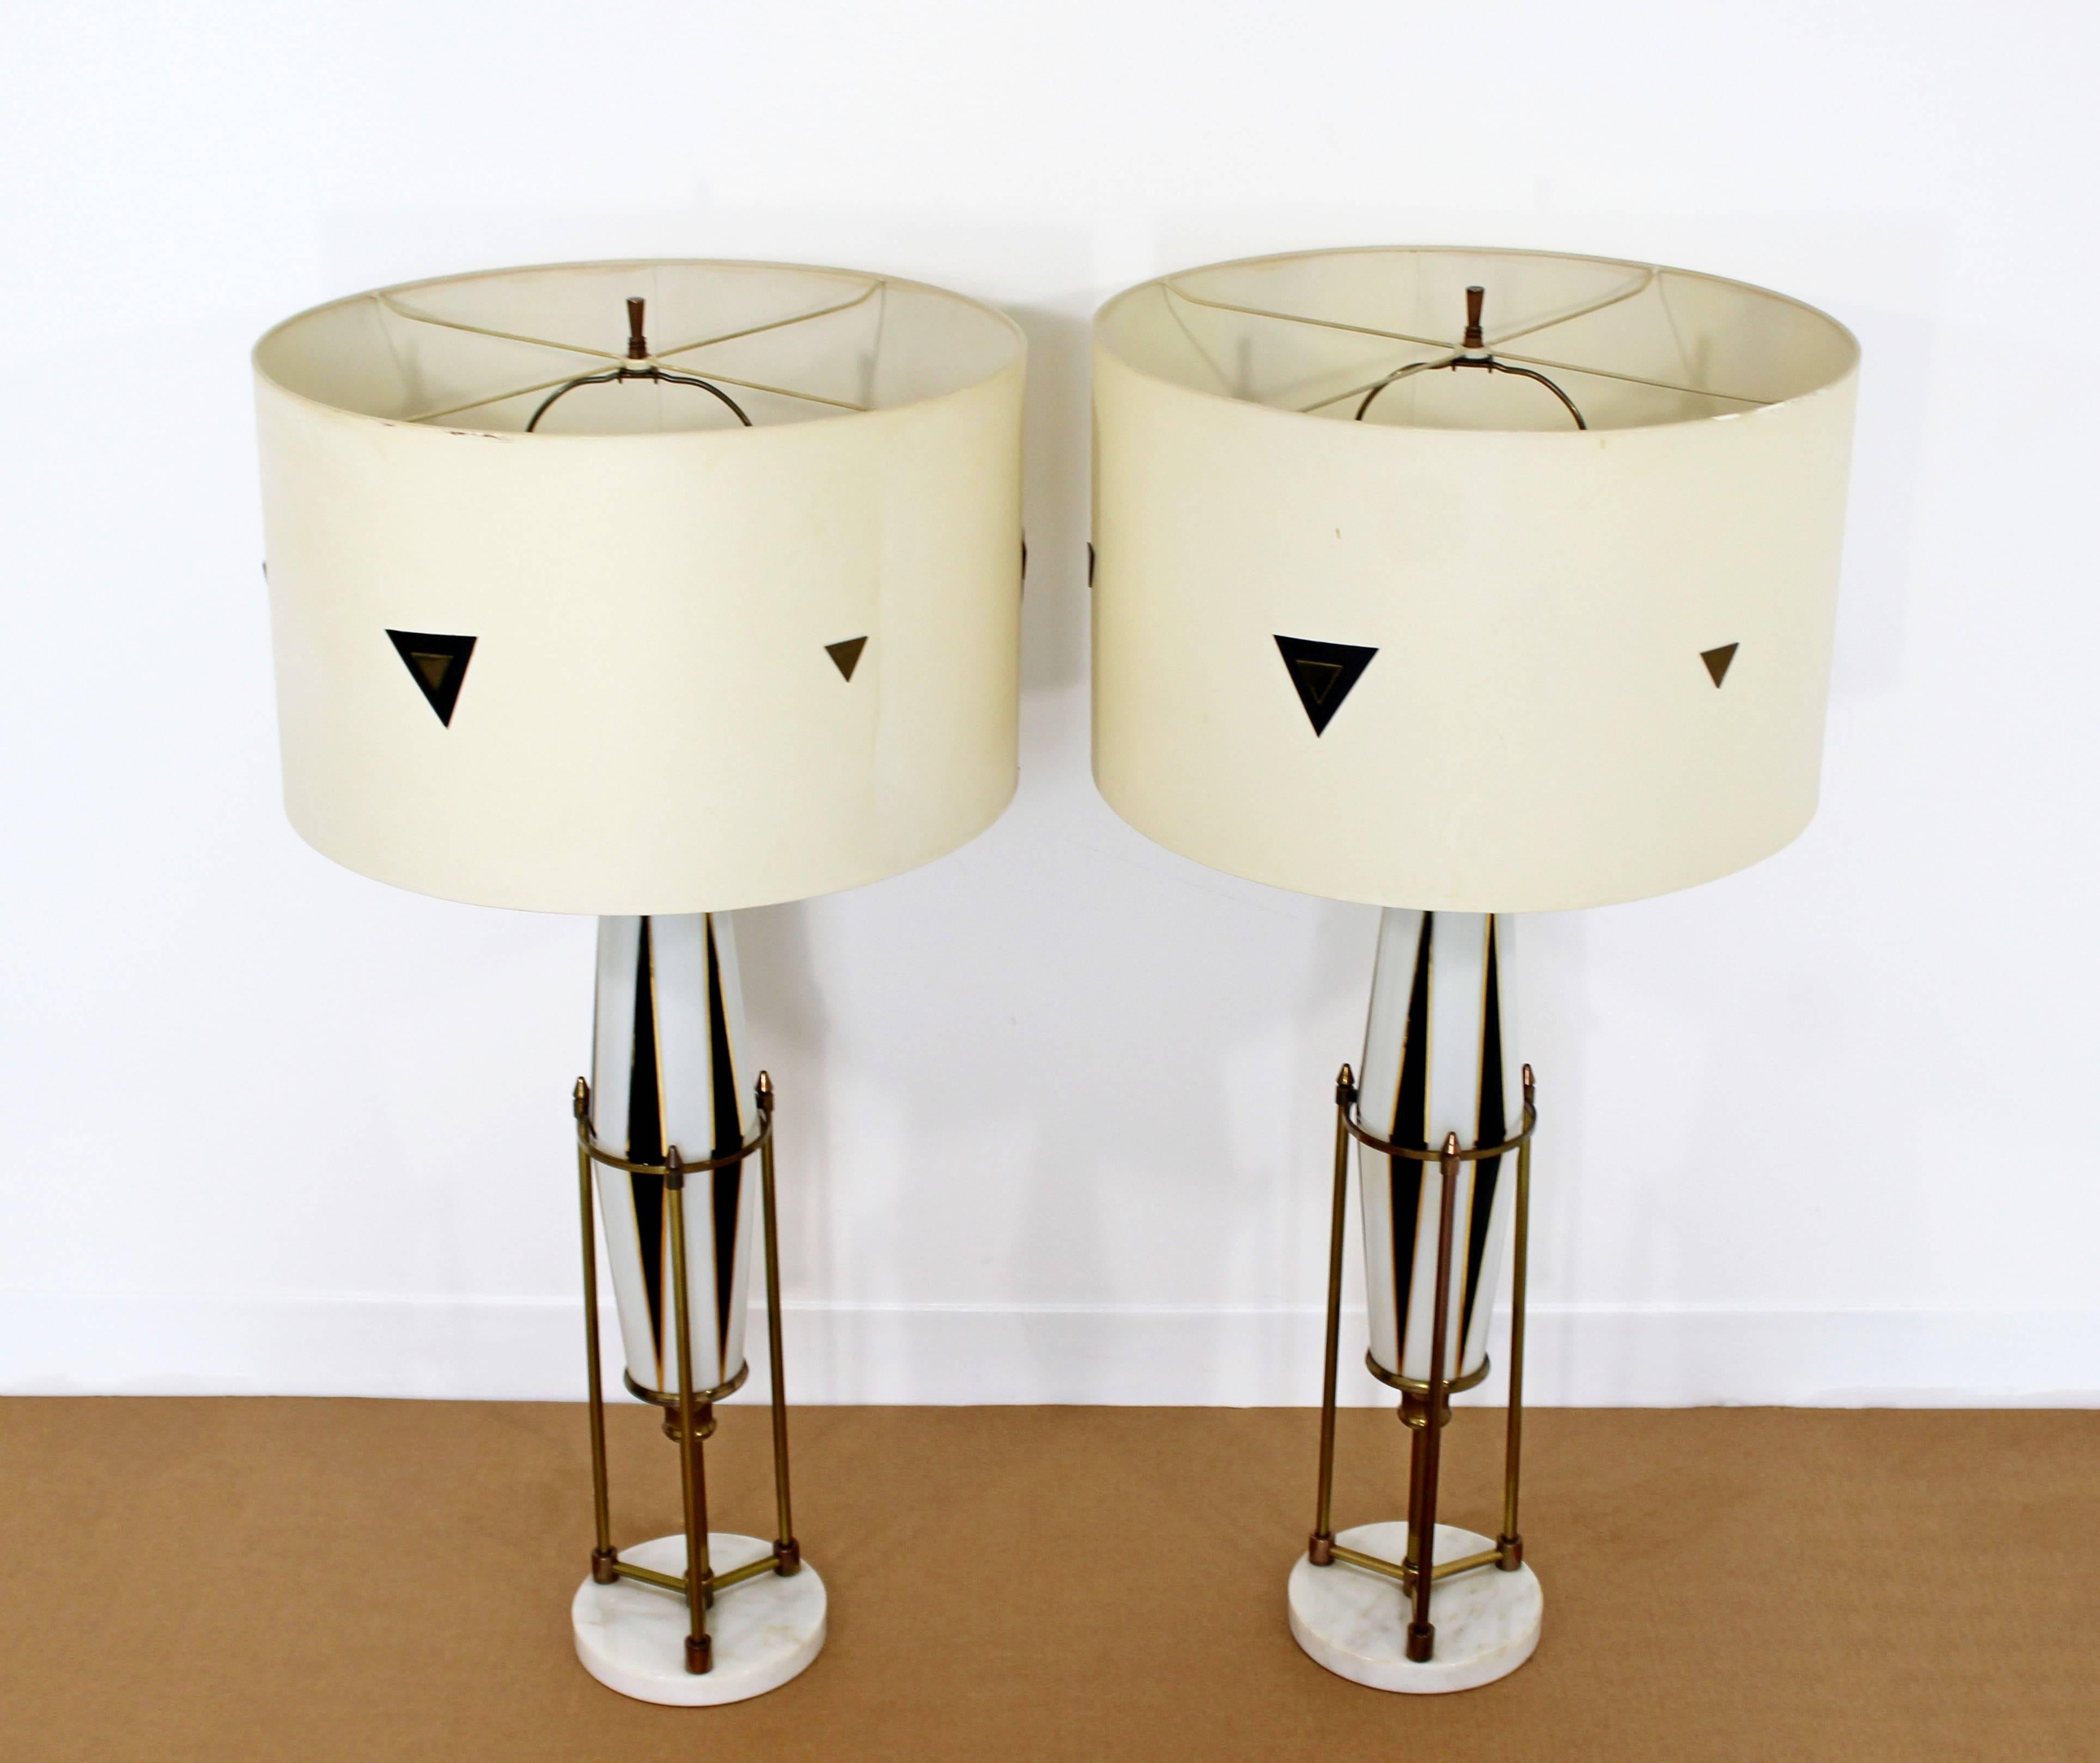 For your consideration is a pair of Hollywood Regency brass and glass table lamps on a marble base with original custom-made matching shades and brass finials, possibly by Lightolier. In excellent condition. The dimensions of the lamps are 7